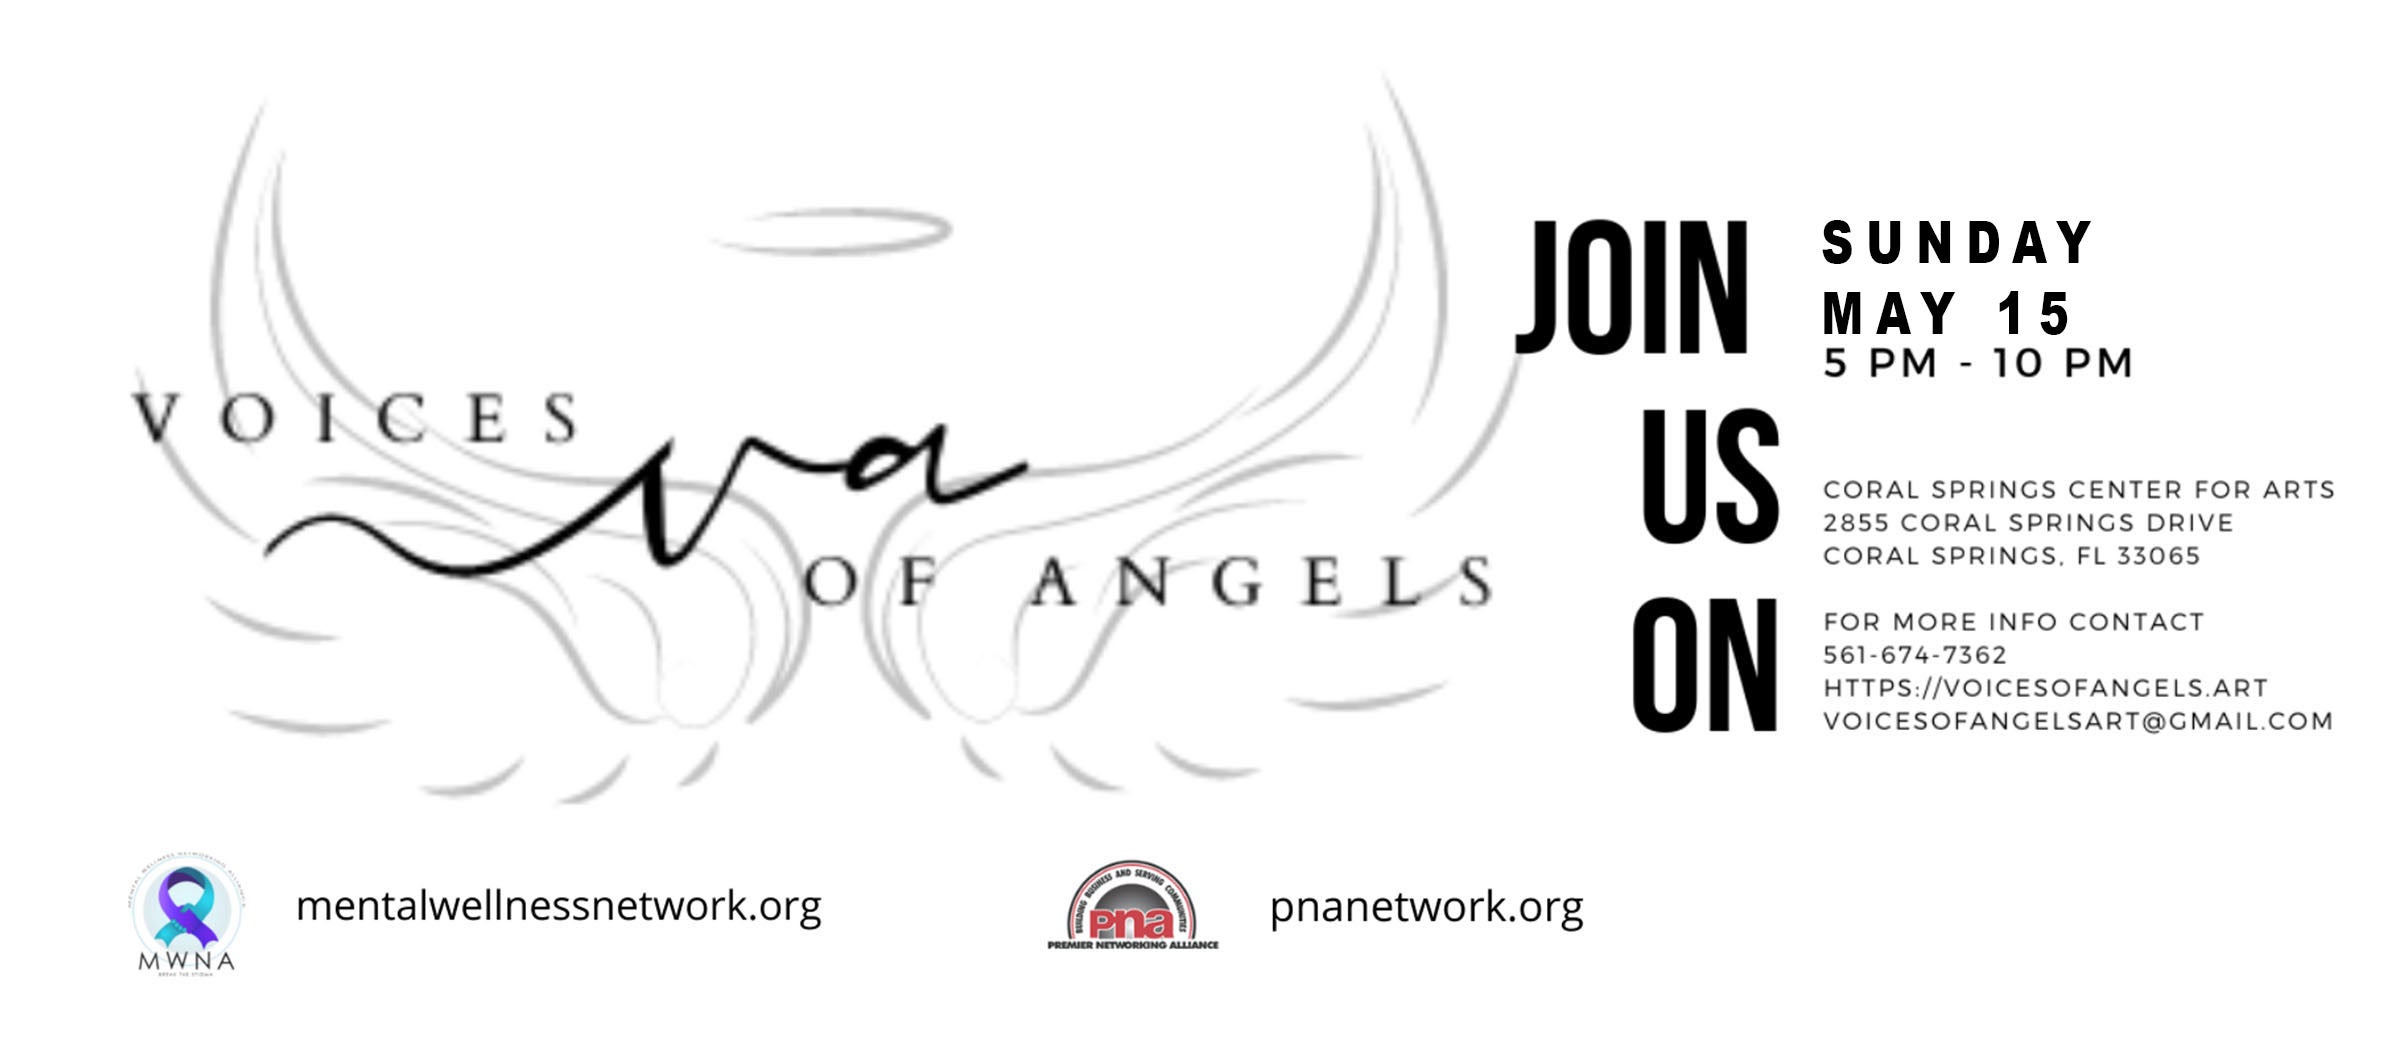 Voices of Angels Art Show and Fundraiser